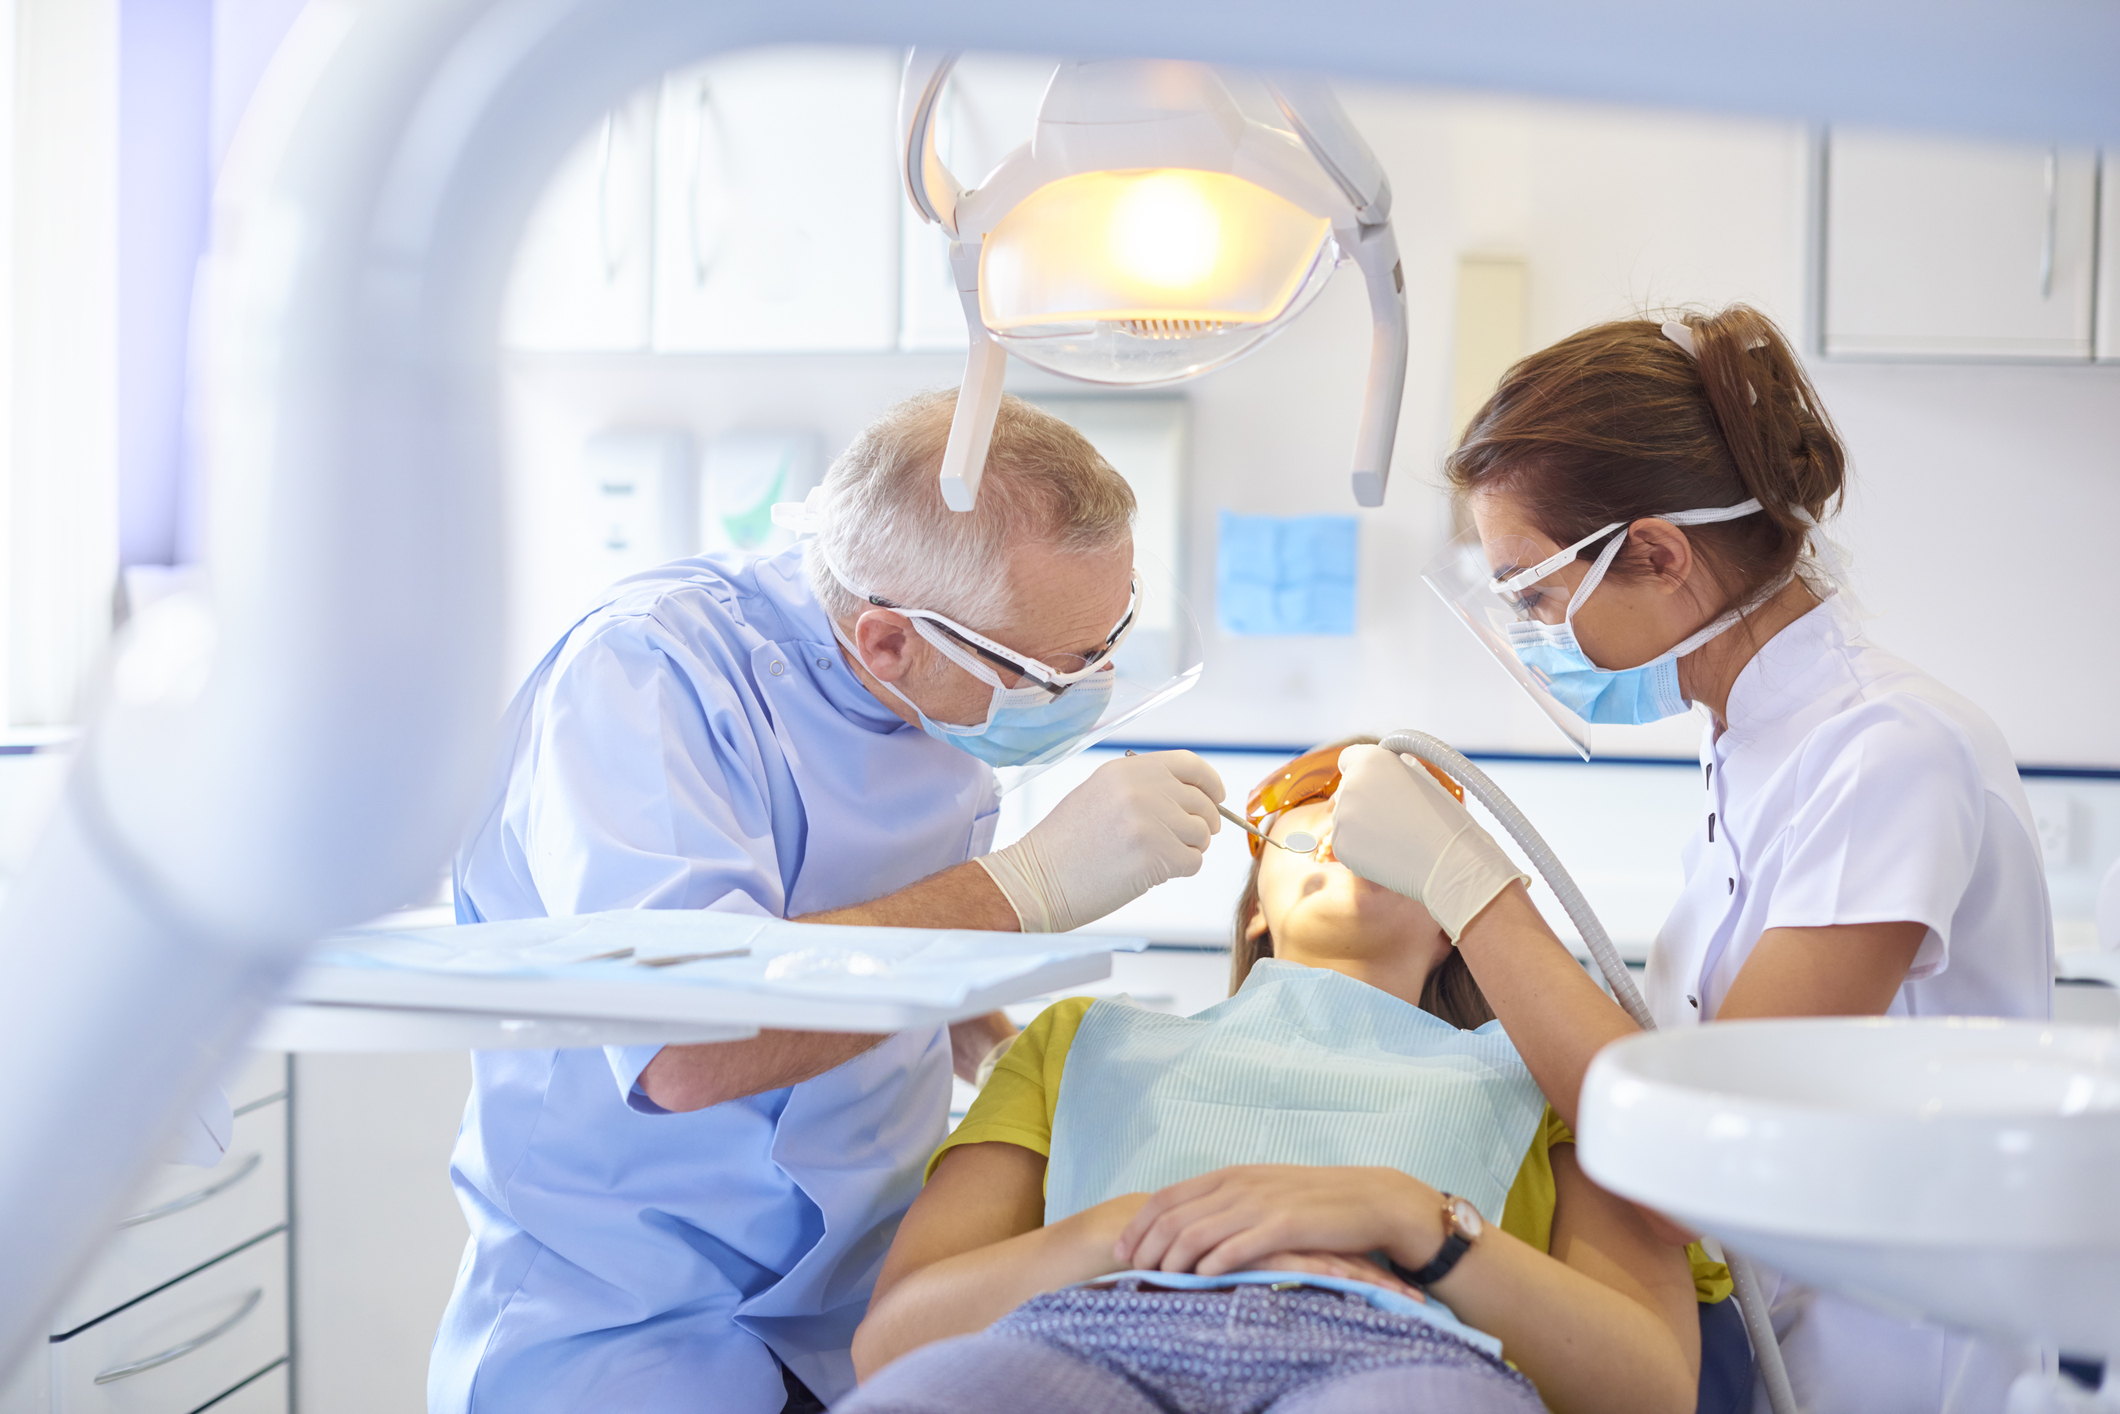 Top 10 Benefits of Laser Dentistry in 2021